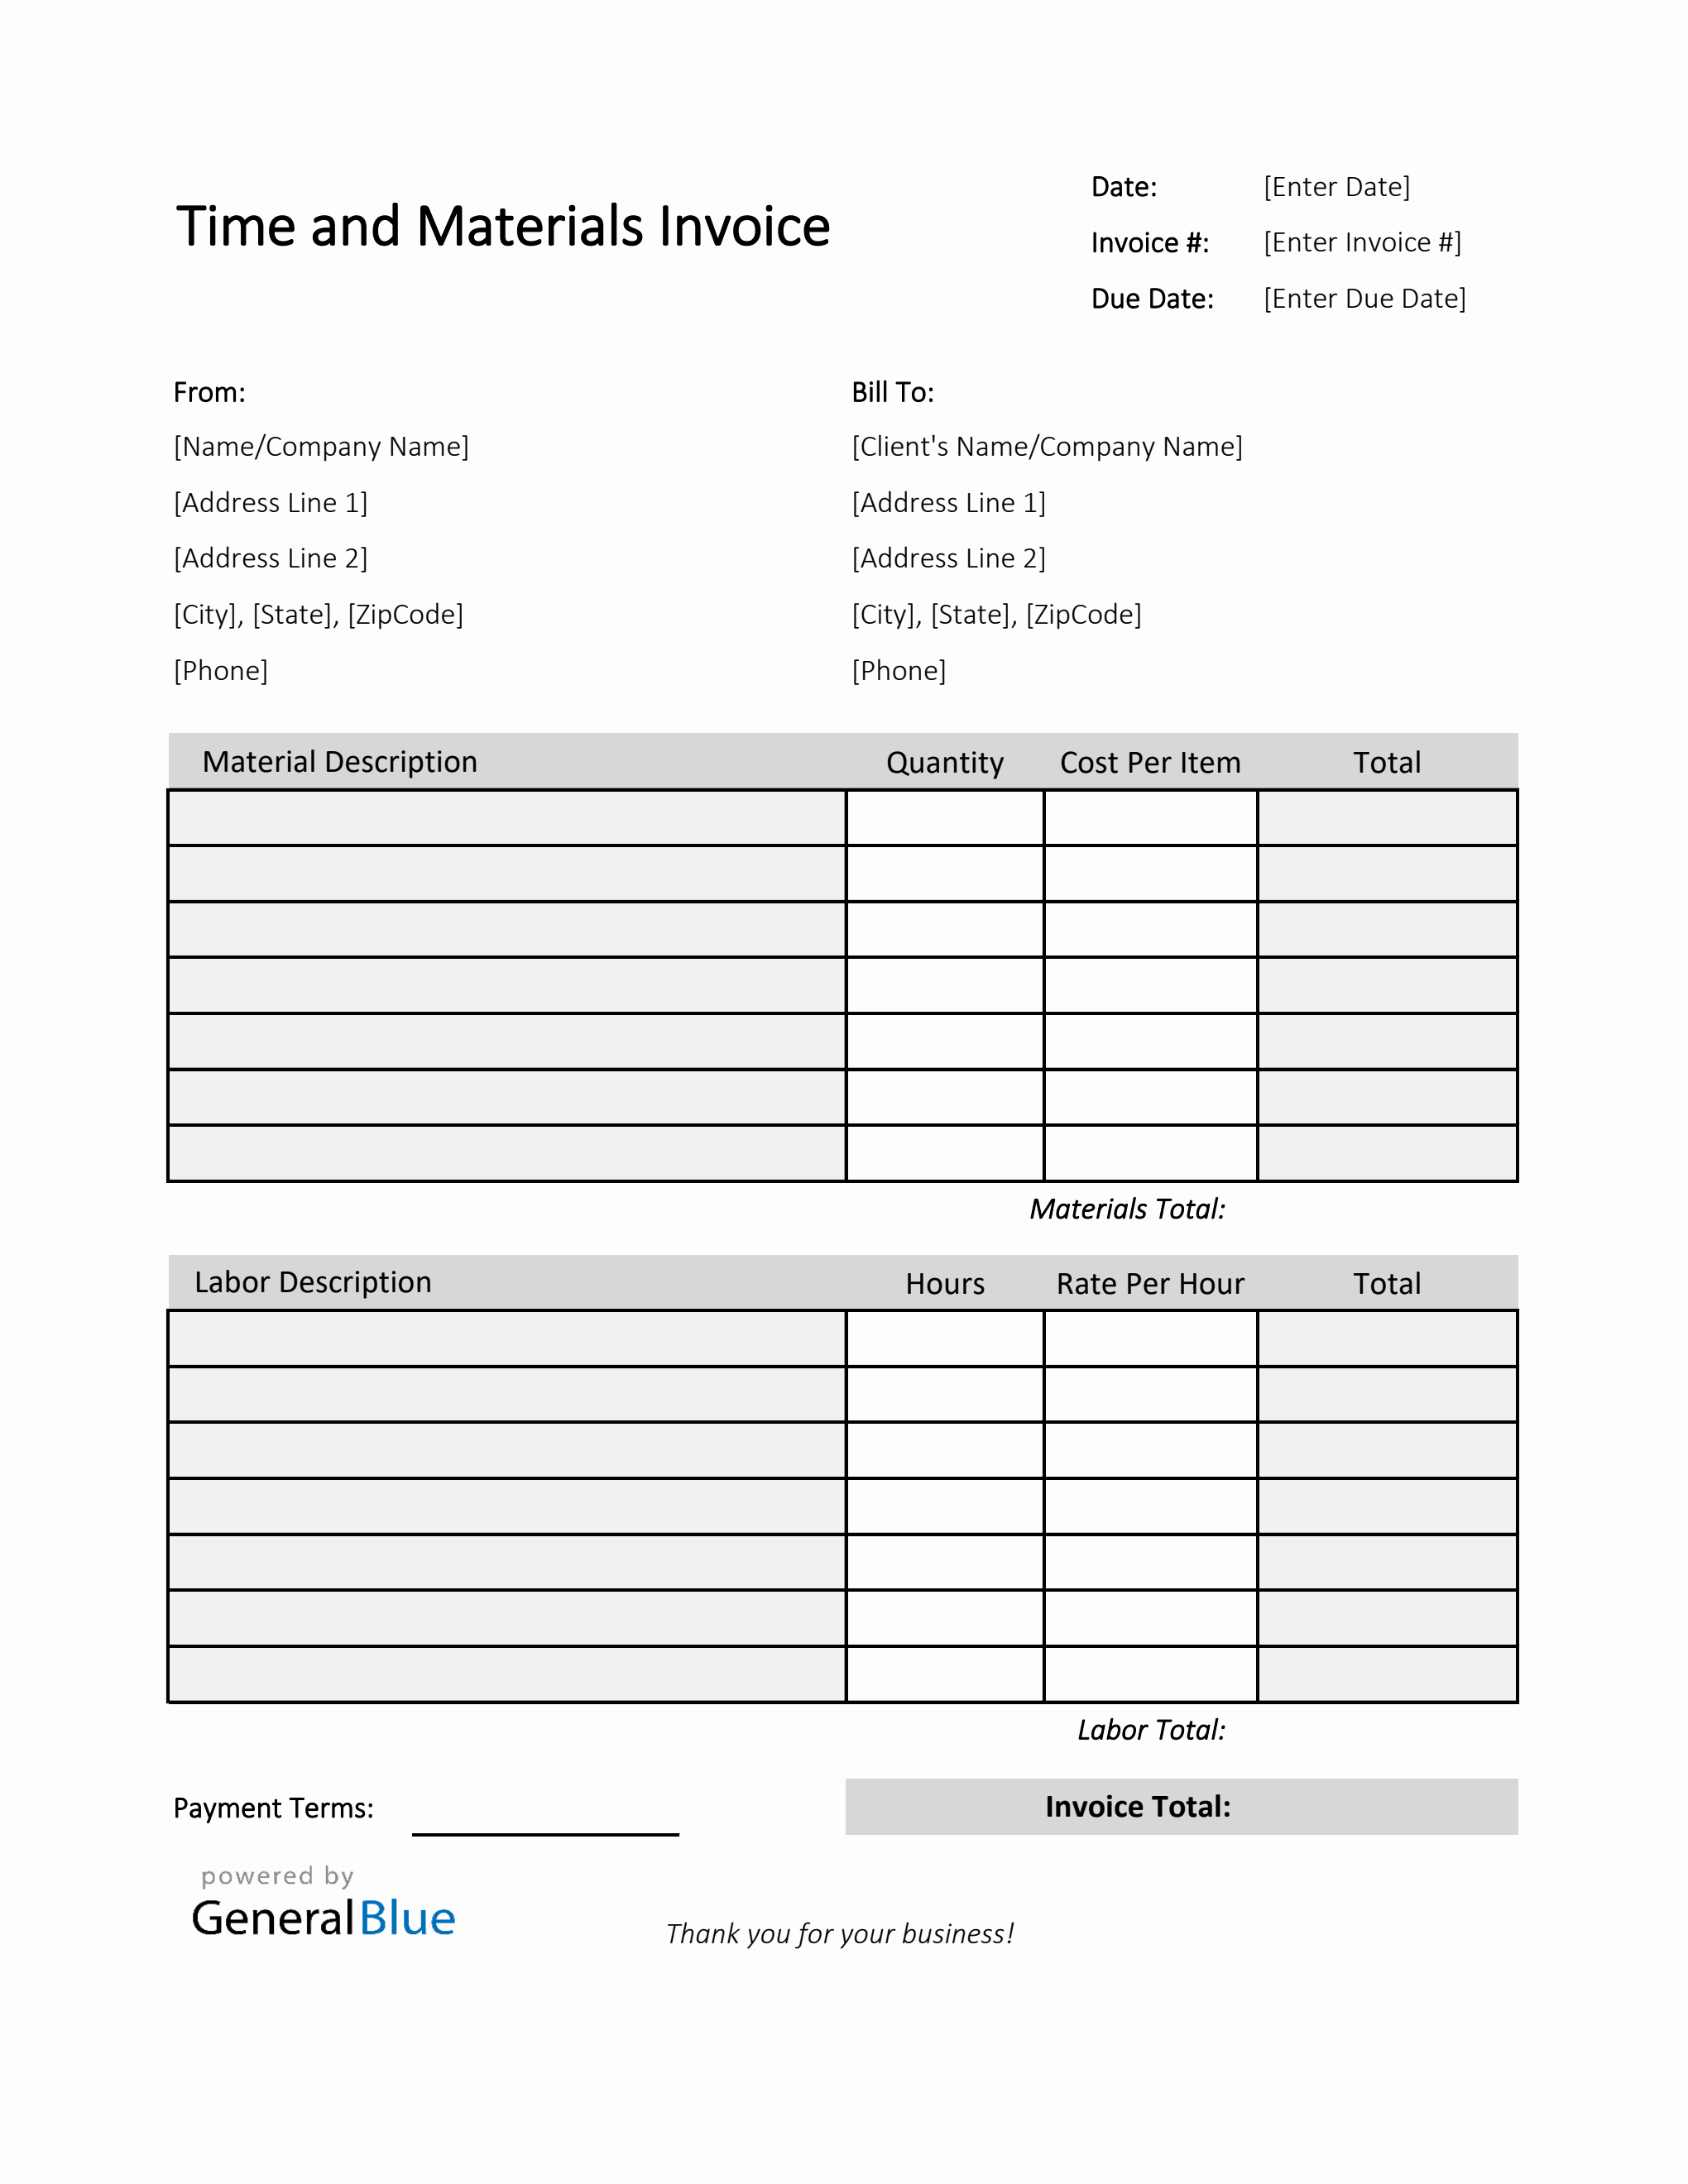 time-and-materials-invoice-in-excel-simple